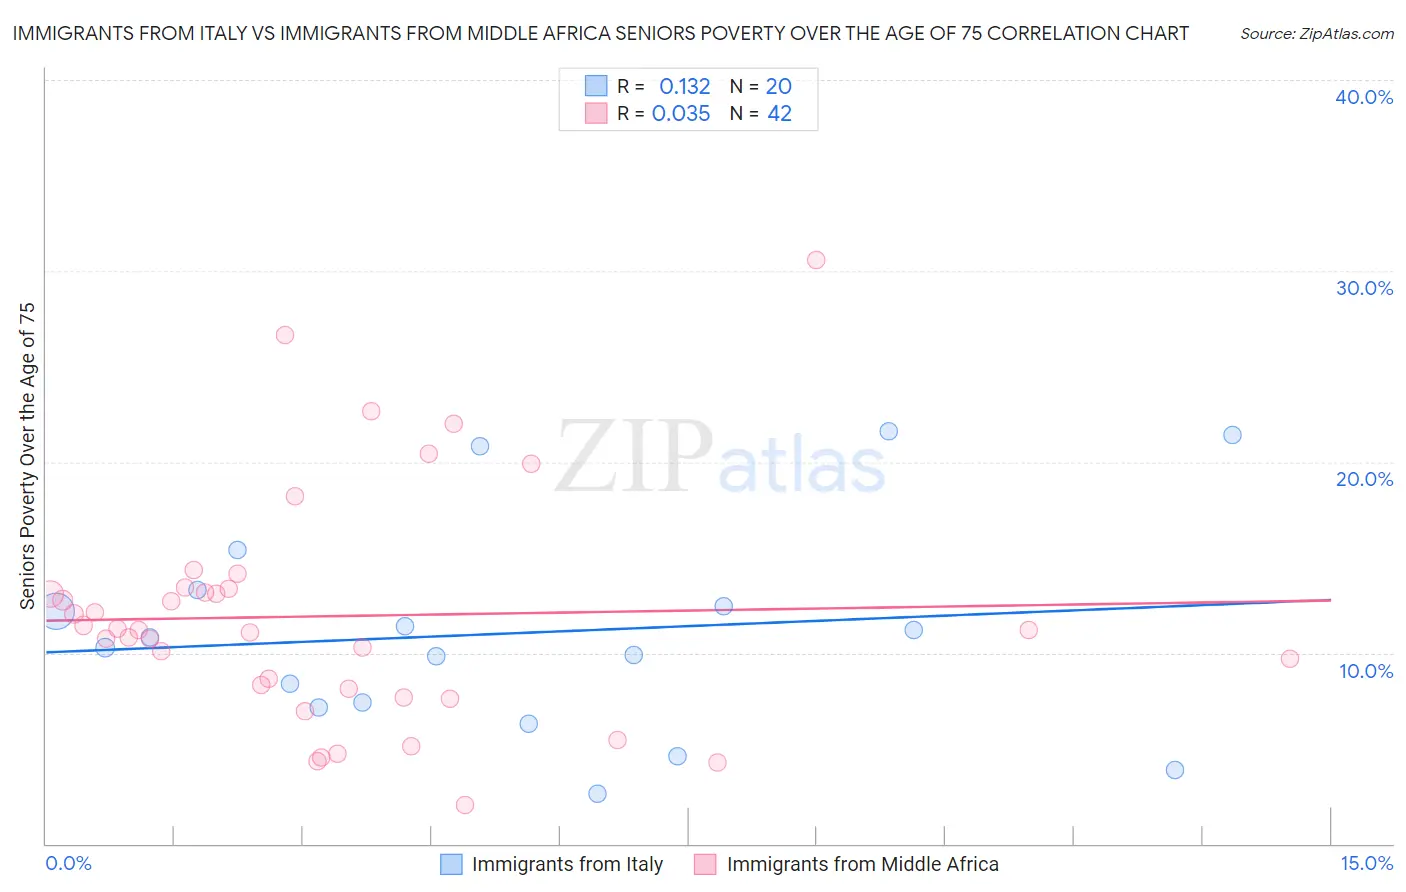 Immigrants from Italy vs Immigrants from Middle Africa Seniors Poverty Over the Age of 75